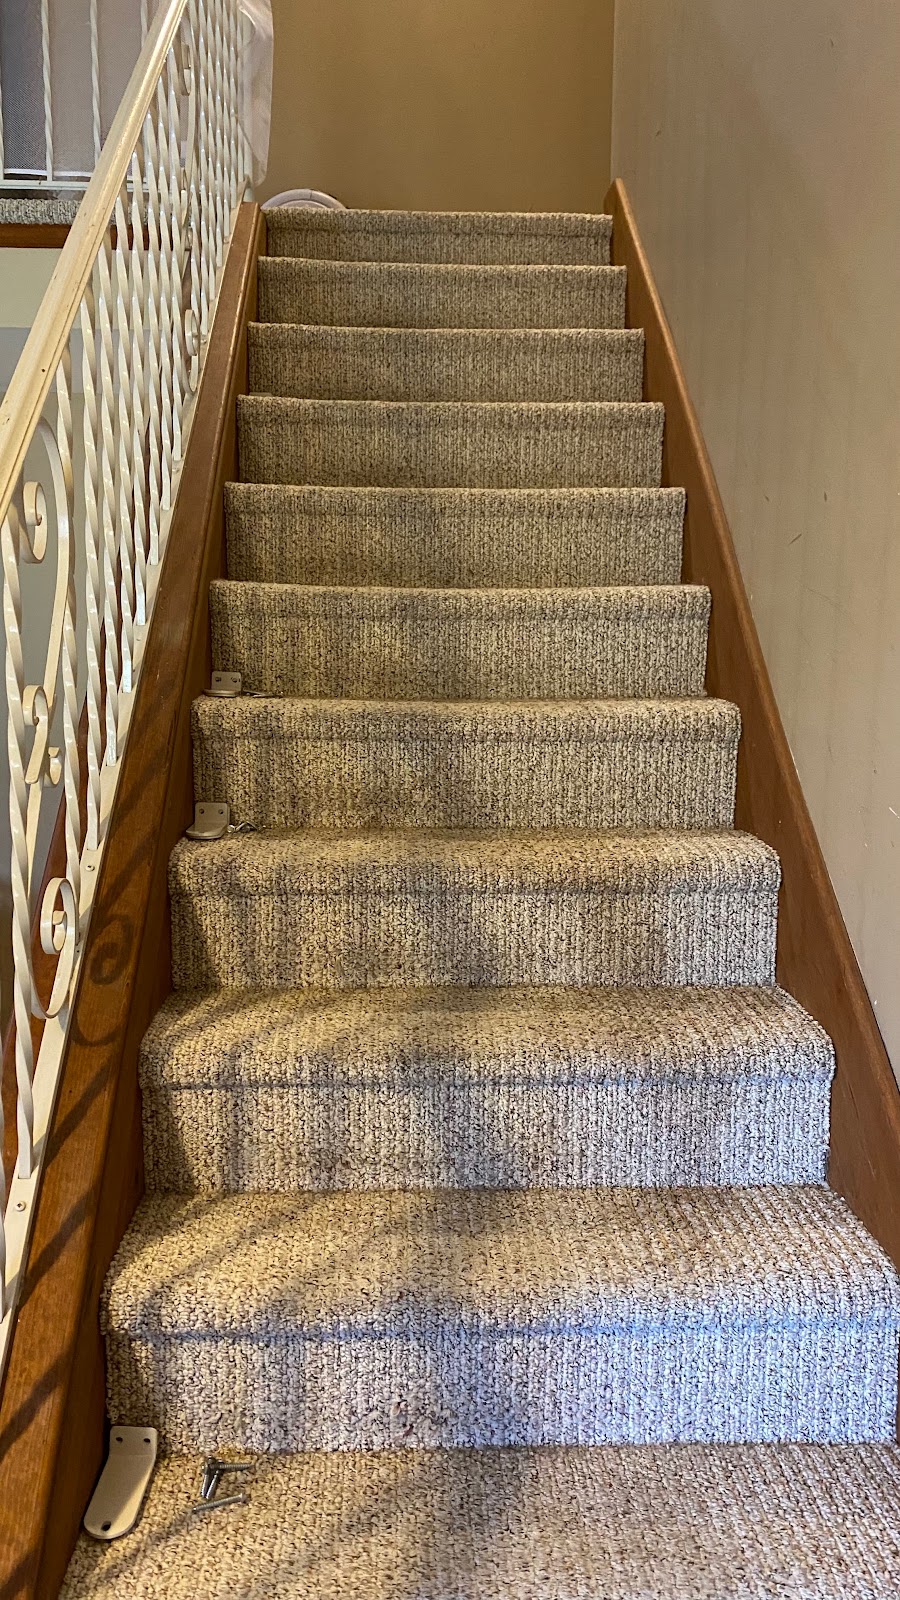 Power Stair Lifts | 2700 William Penn Hwy, Easton, PA 18045 | Phone: (484) 895-1188